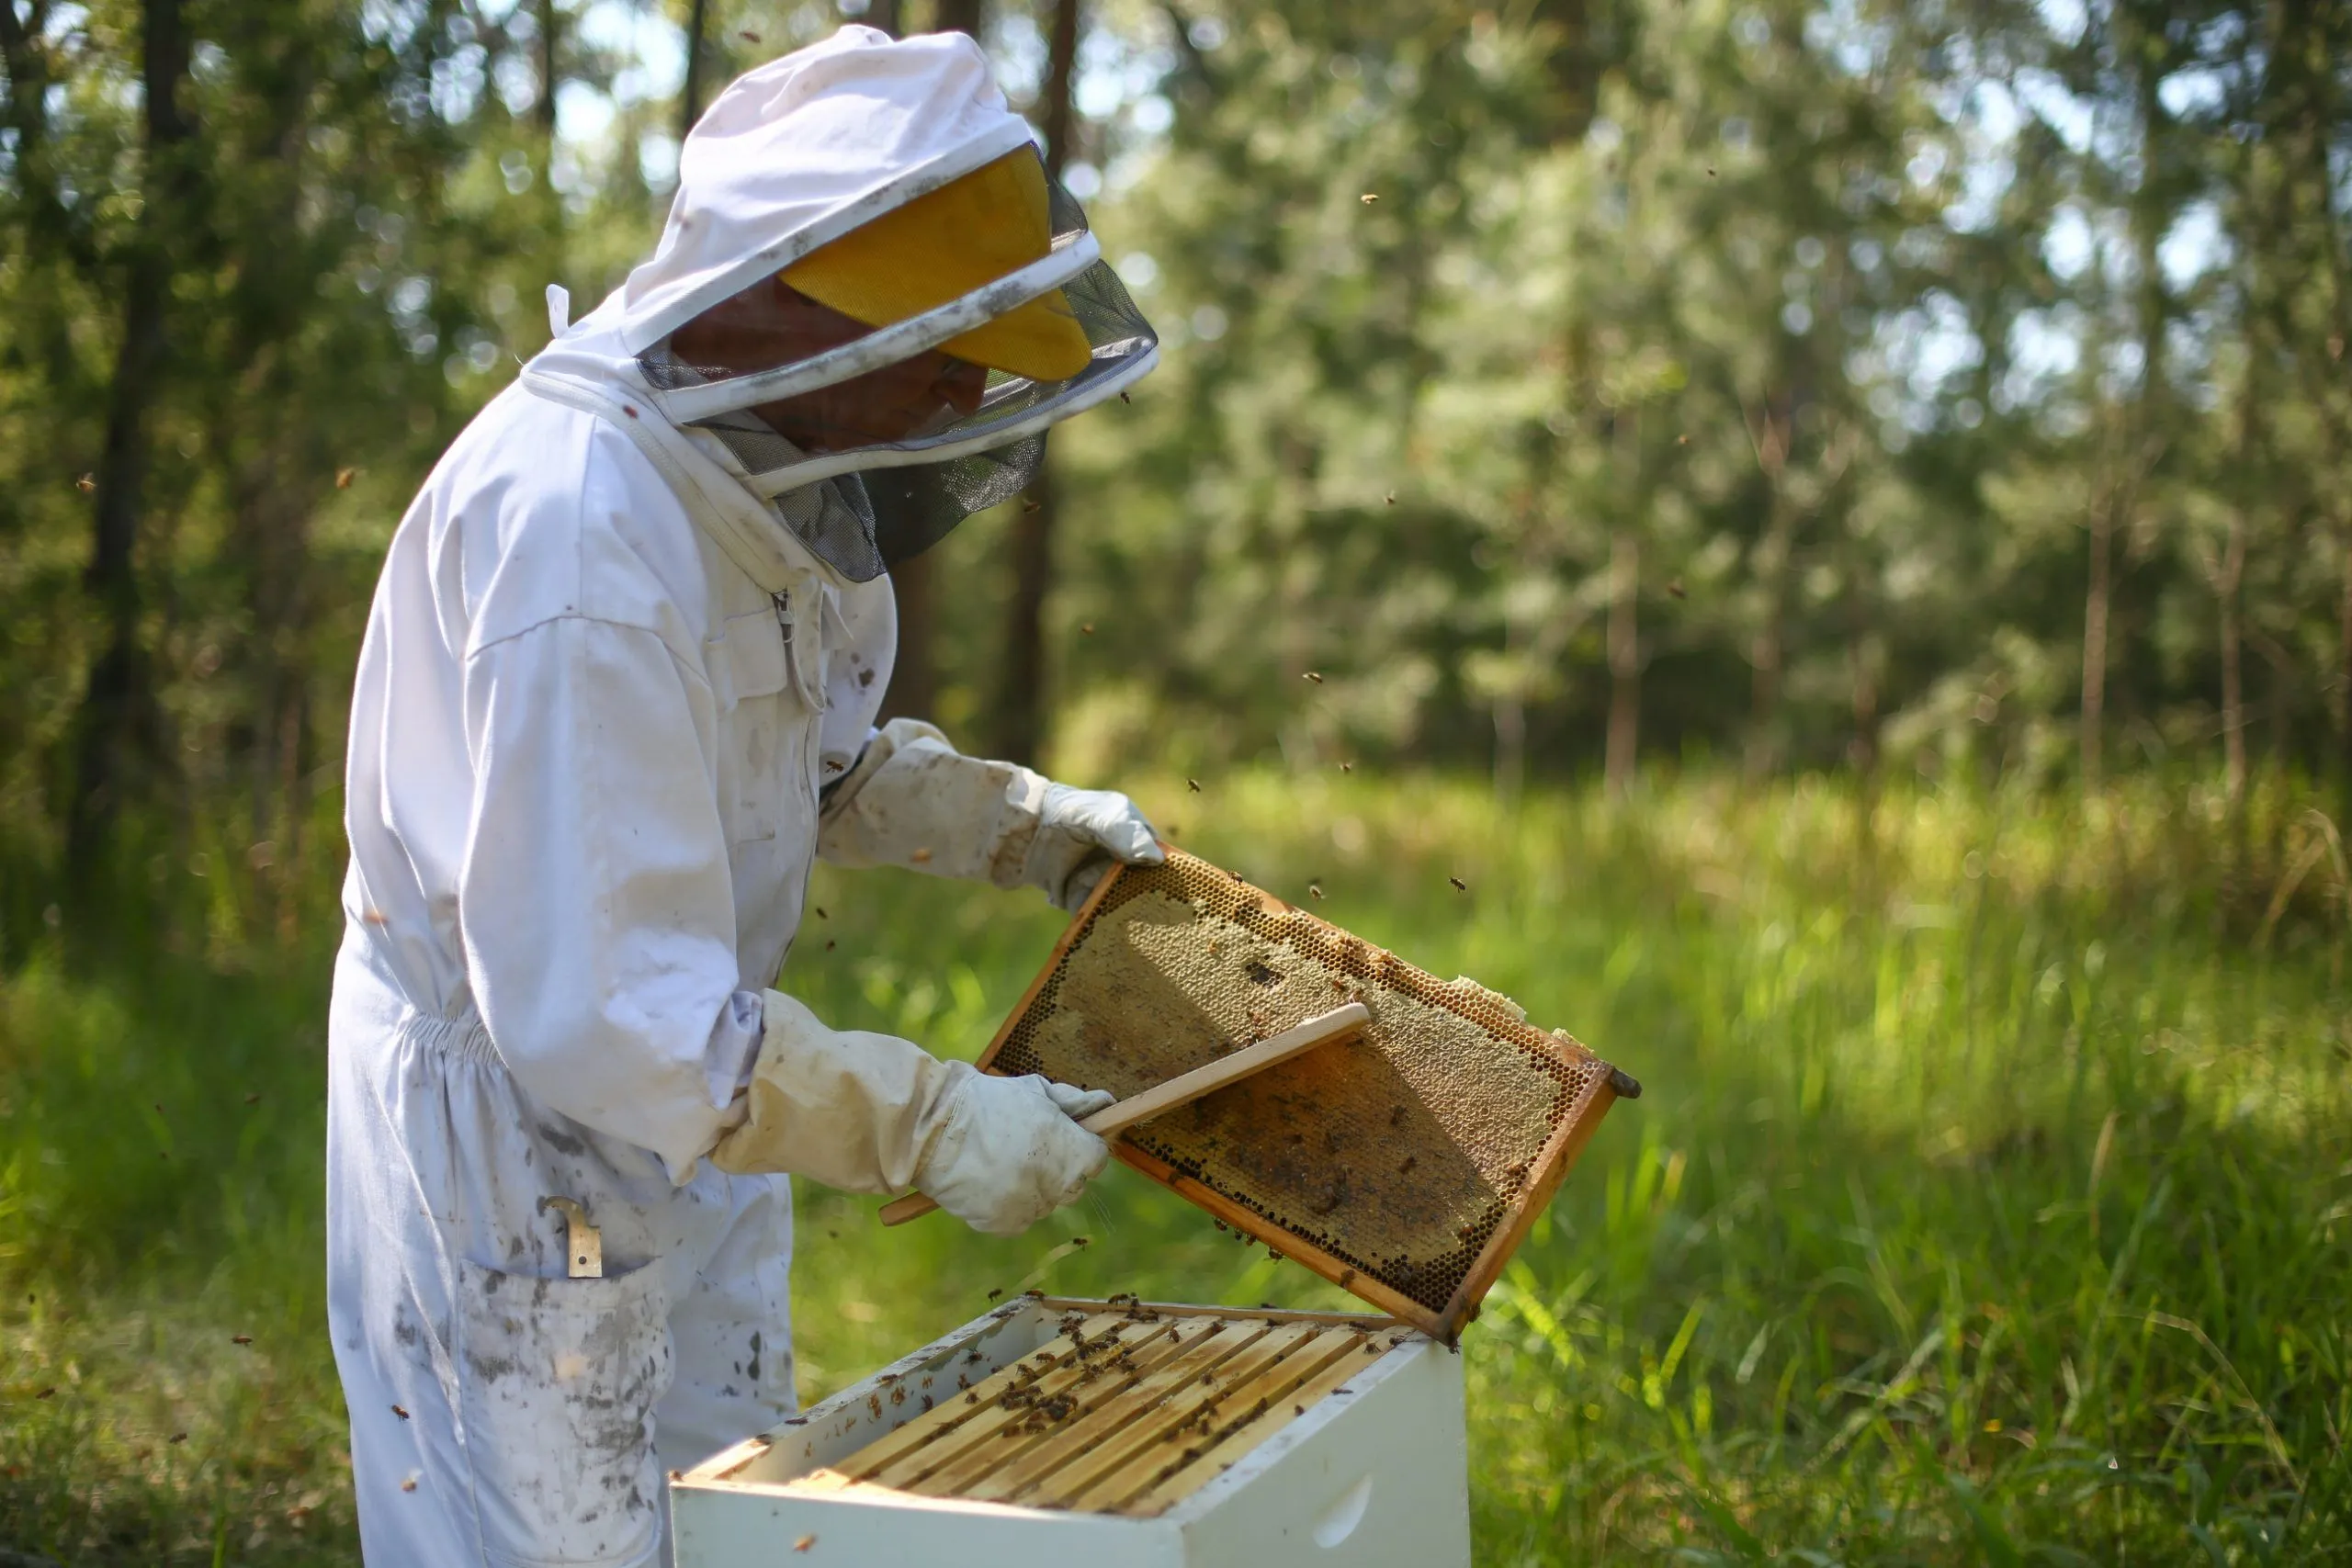 Introduction to Local Beekeeping and Honey